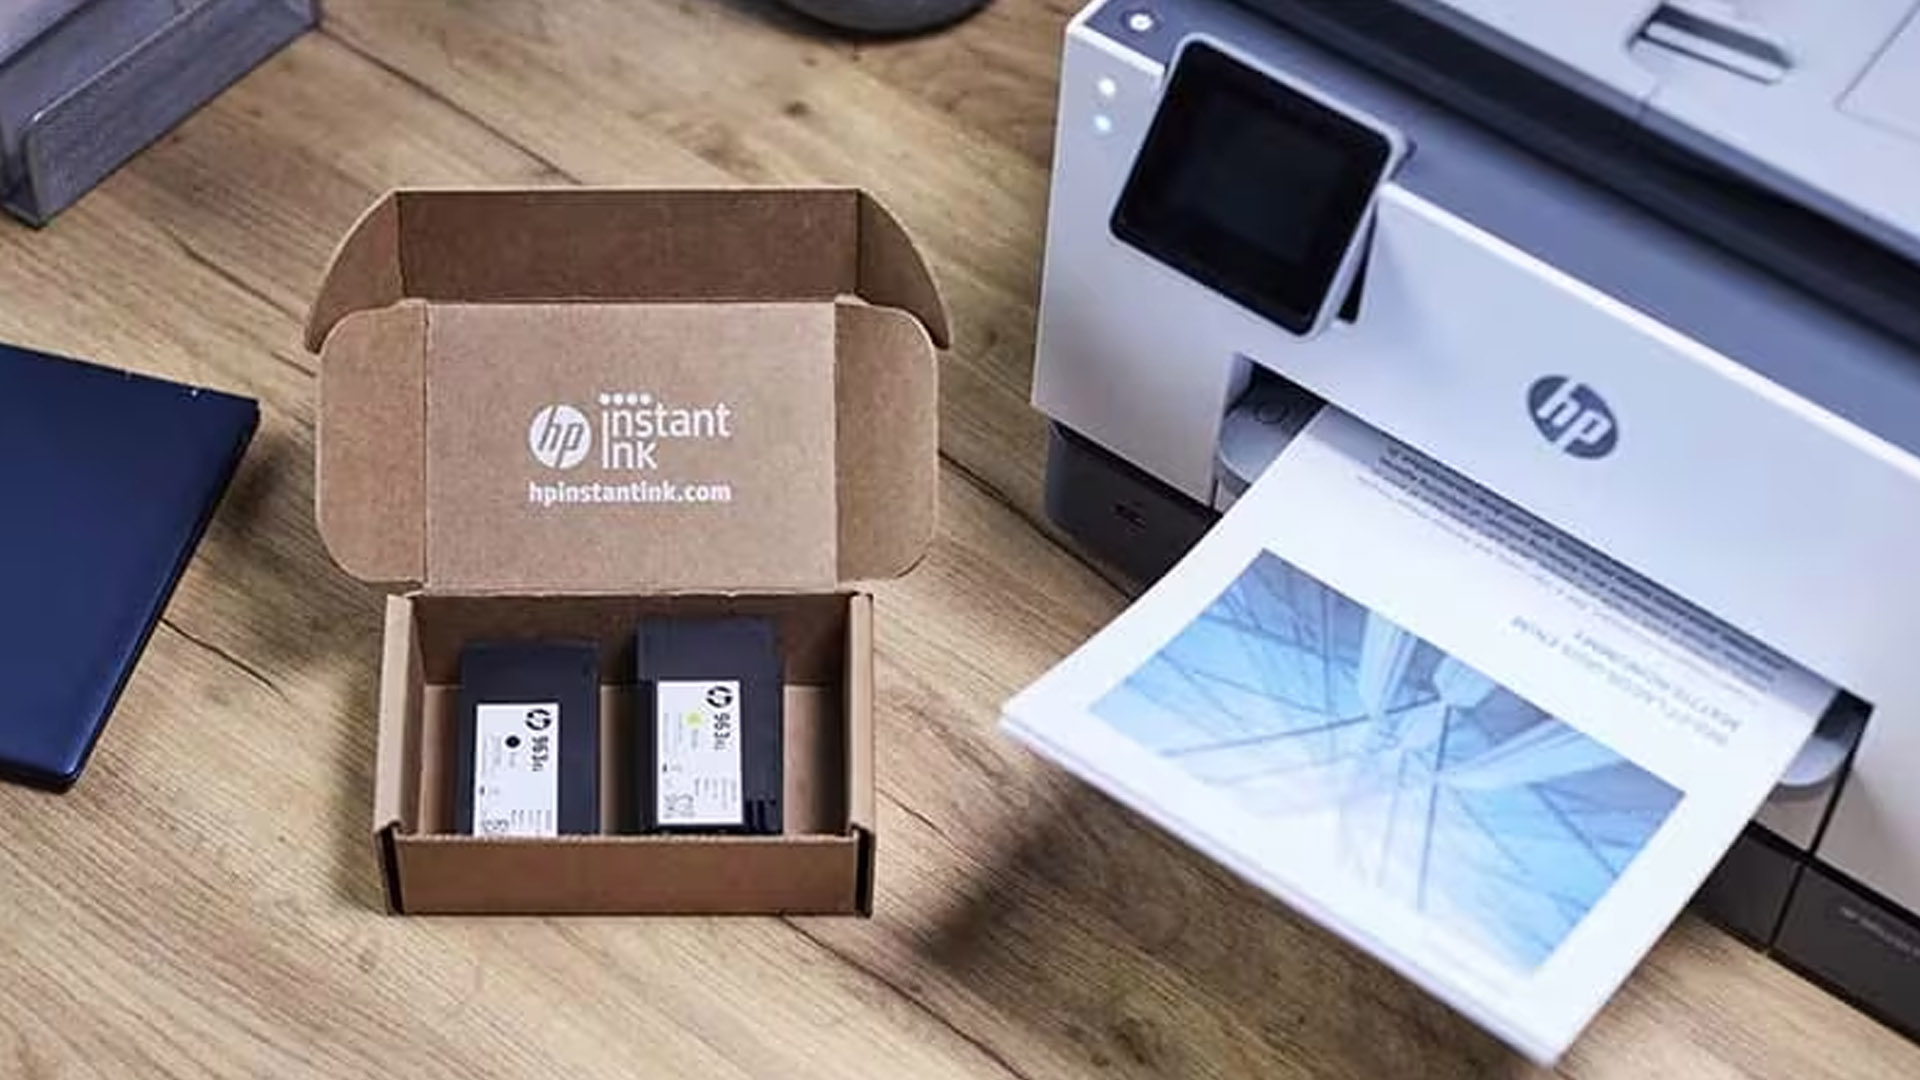 HP instant ink subscription cartridge